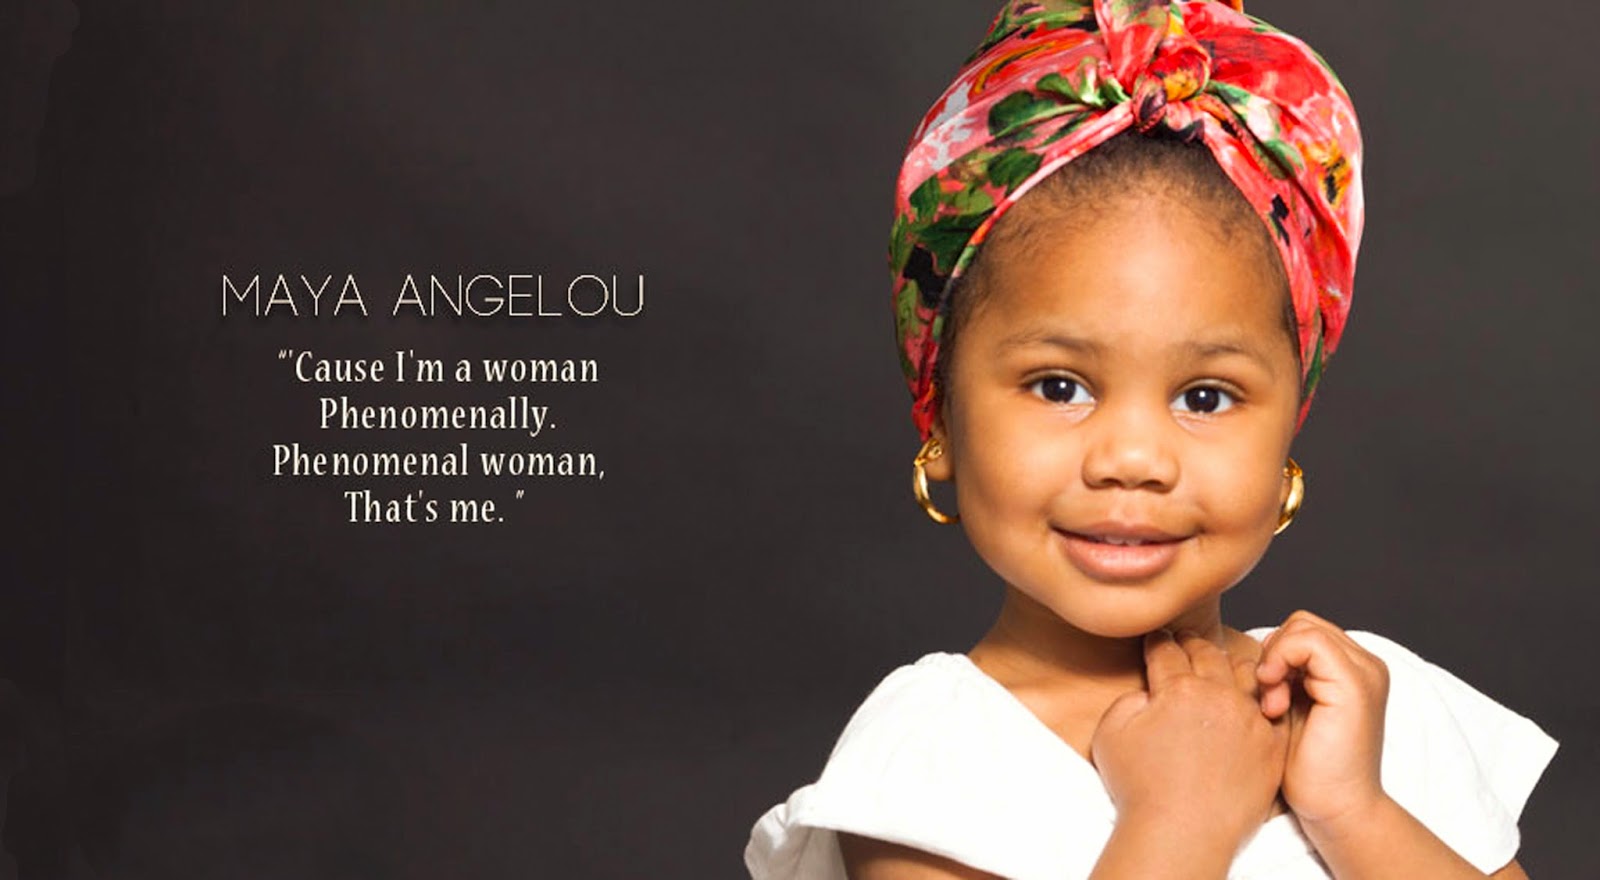 25 of my favorite quotes by Dr Maya Angelou